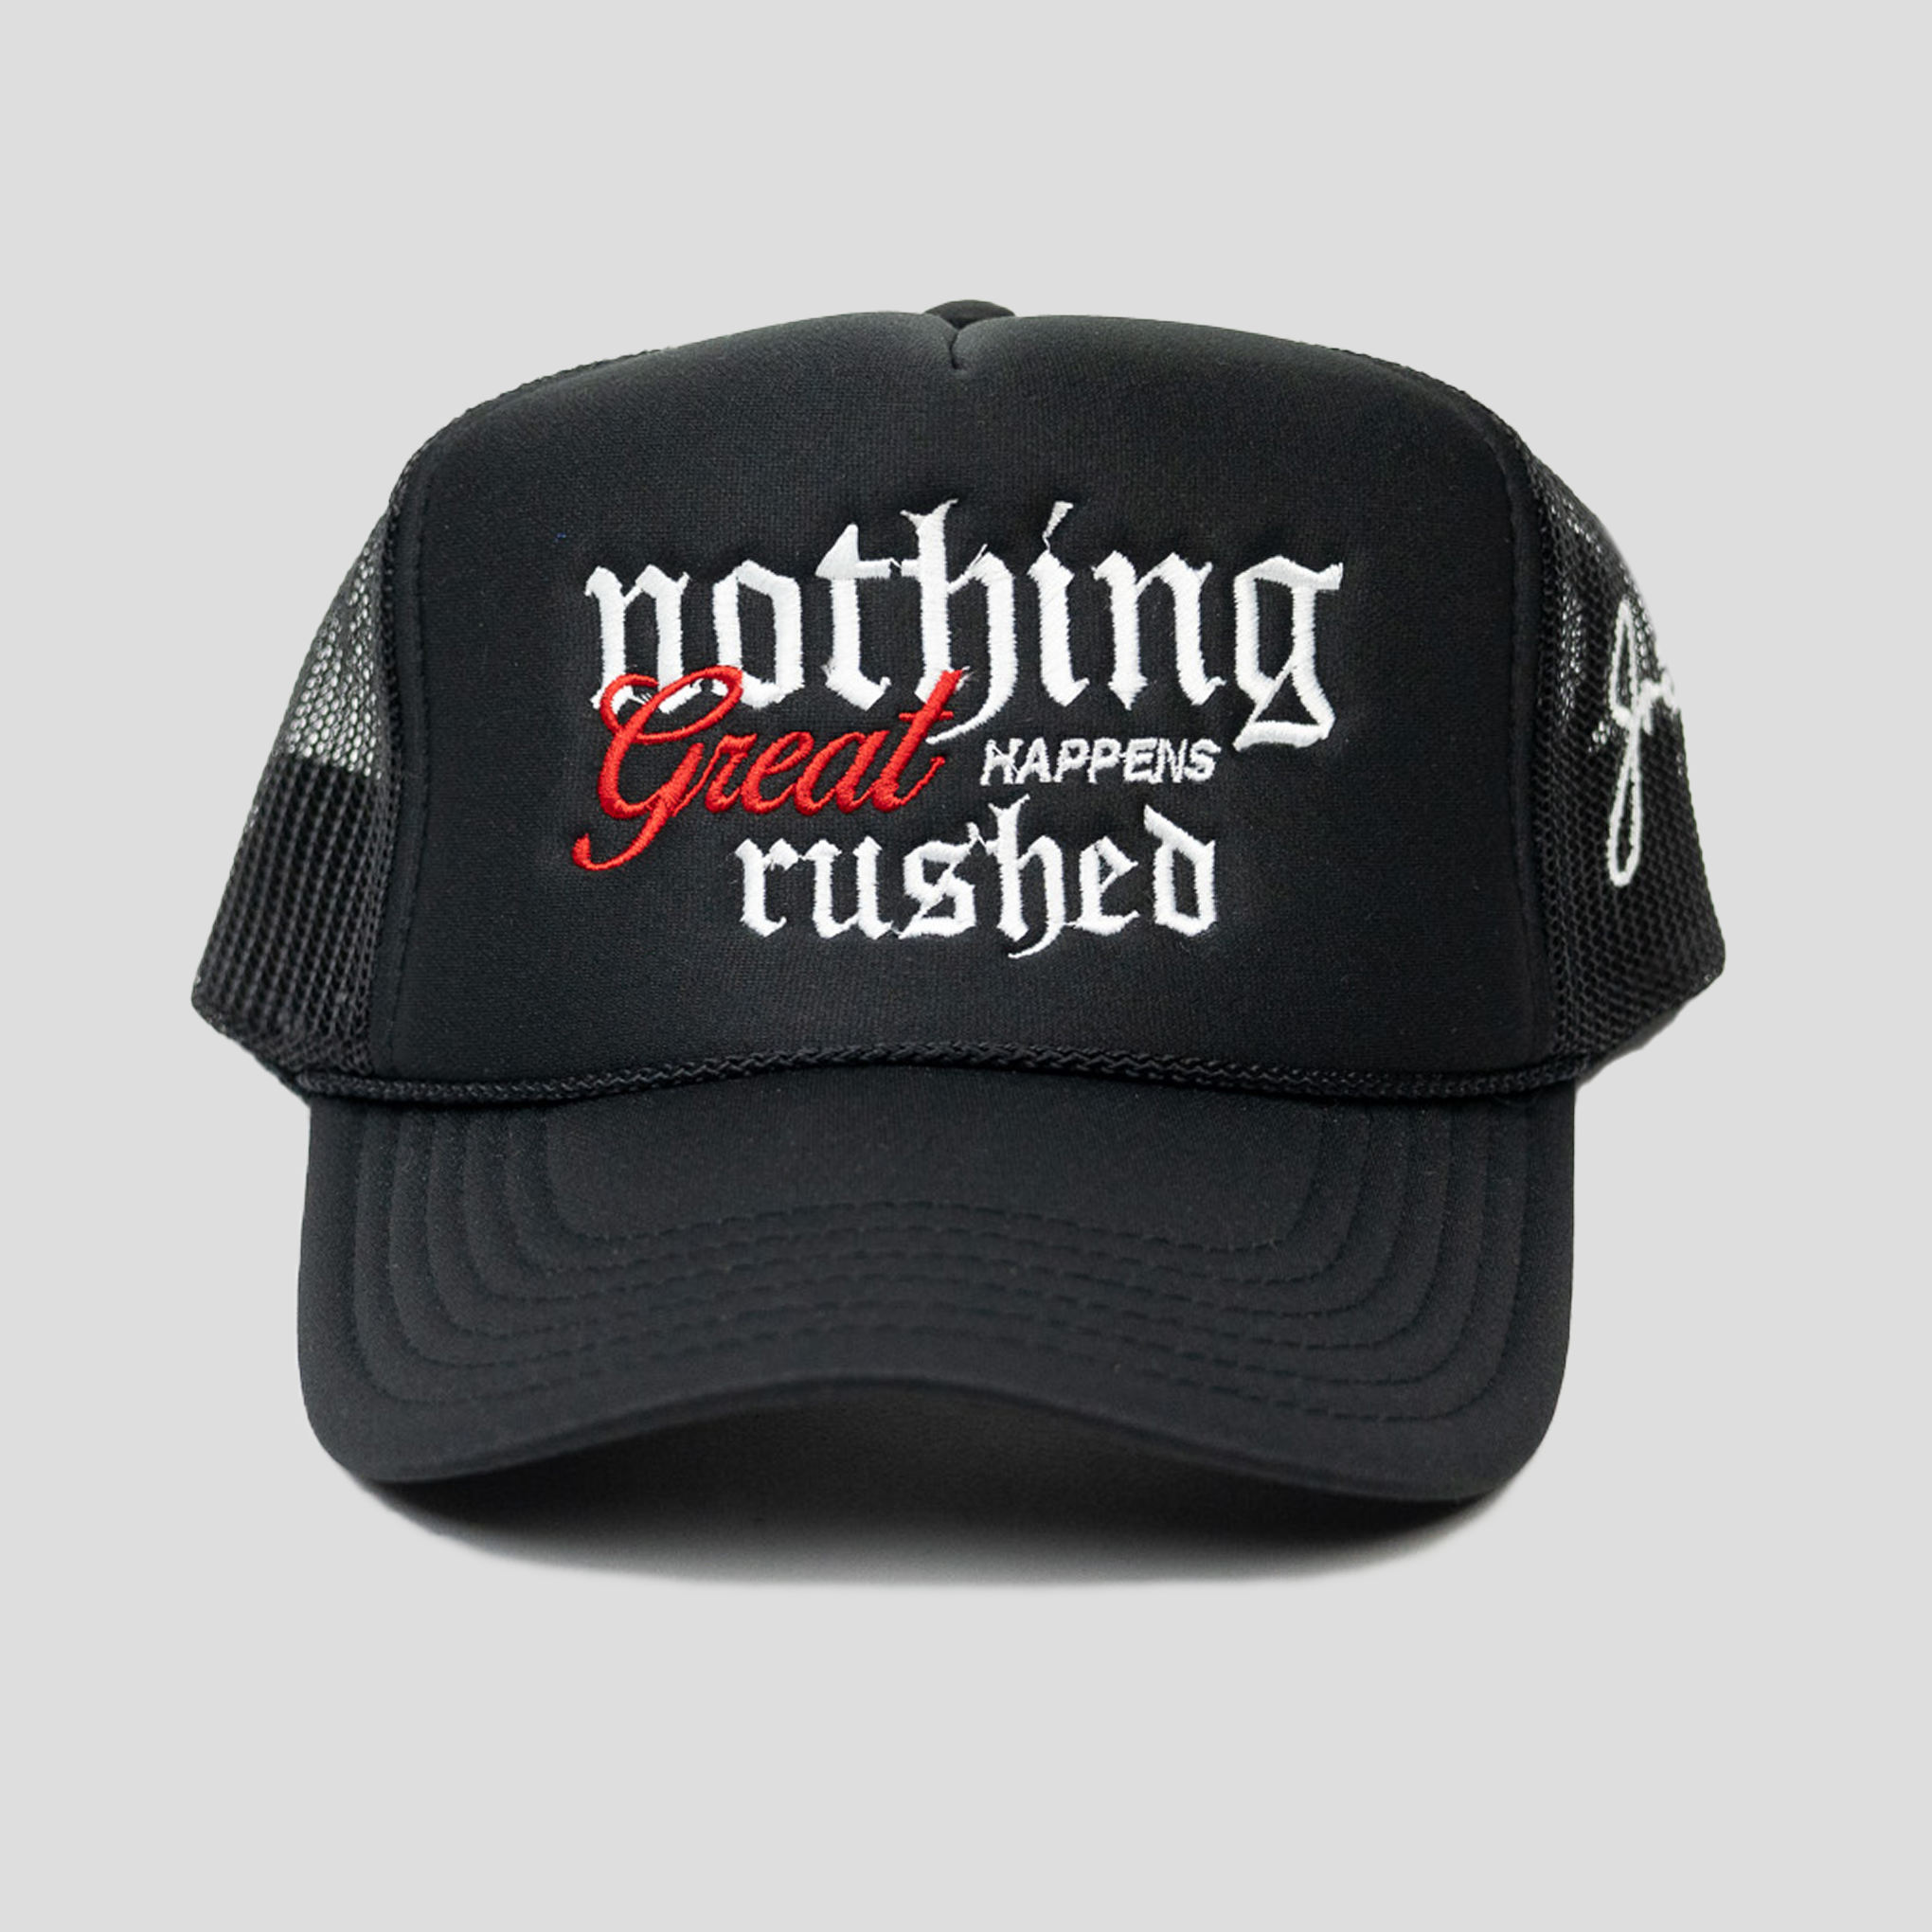 Nothing Great Happens Rushed Trucker Hat (BLACK)